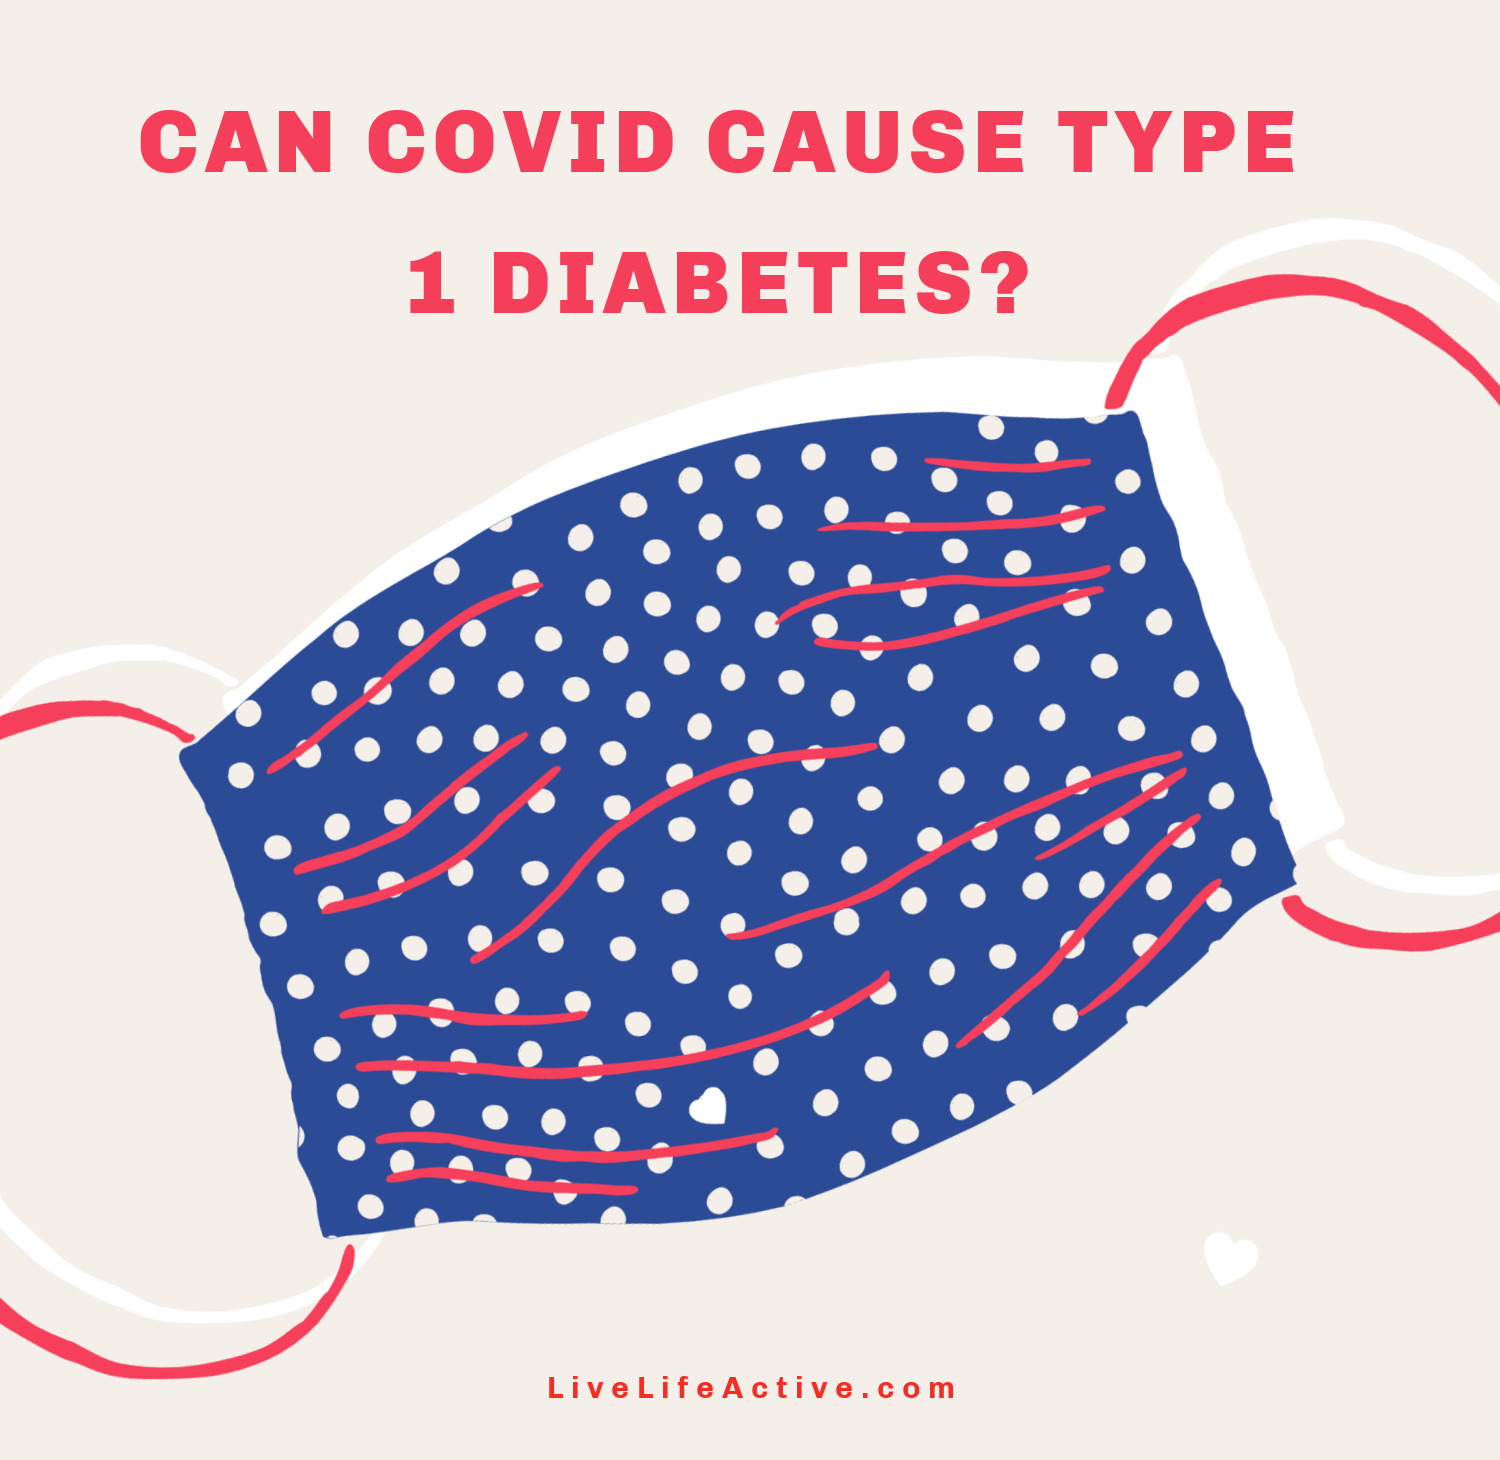 can covid cause diabetes